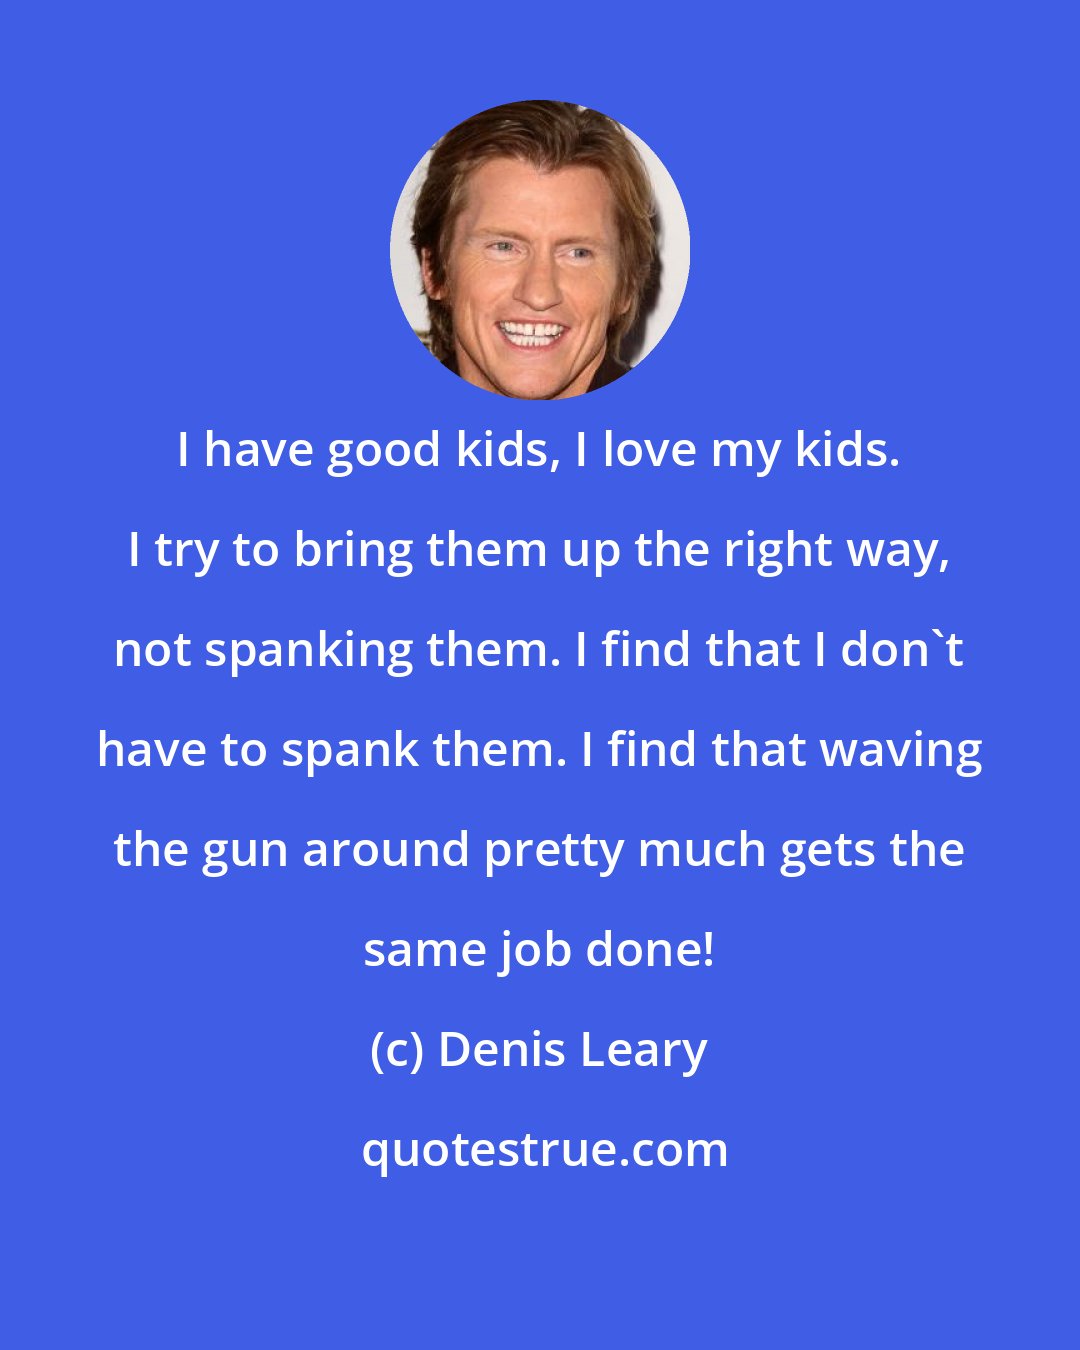 Denis Leary: I have good kids, I love my kids. I try to bring them up the right way, not spanking them. I find that I don't have to spank them. I find that waving the gun around pretty much gets the same job done!